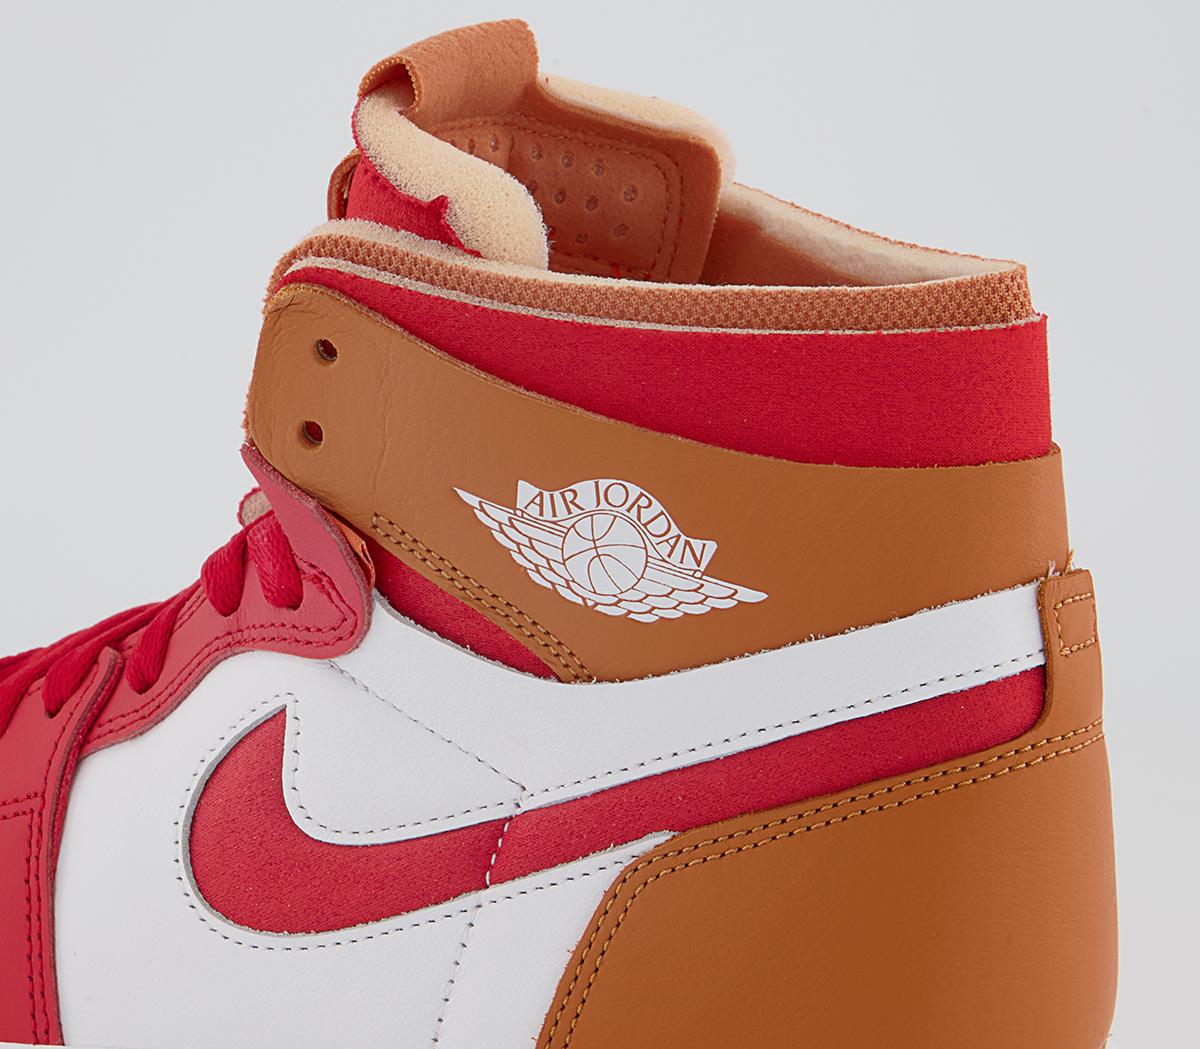 Jordan Air Jordan 1 Zoom Comfort Trainers Fire Red Fire Red Hot Curry ...